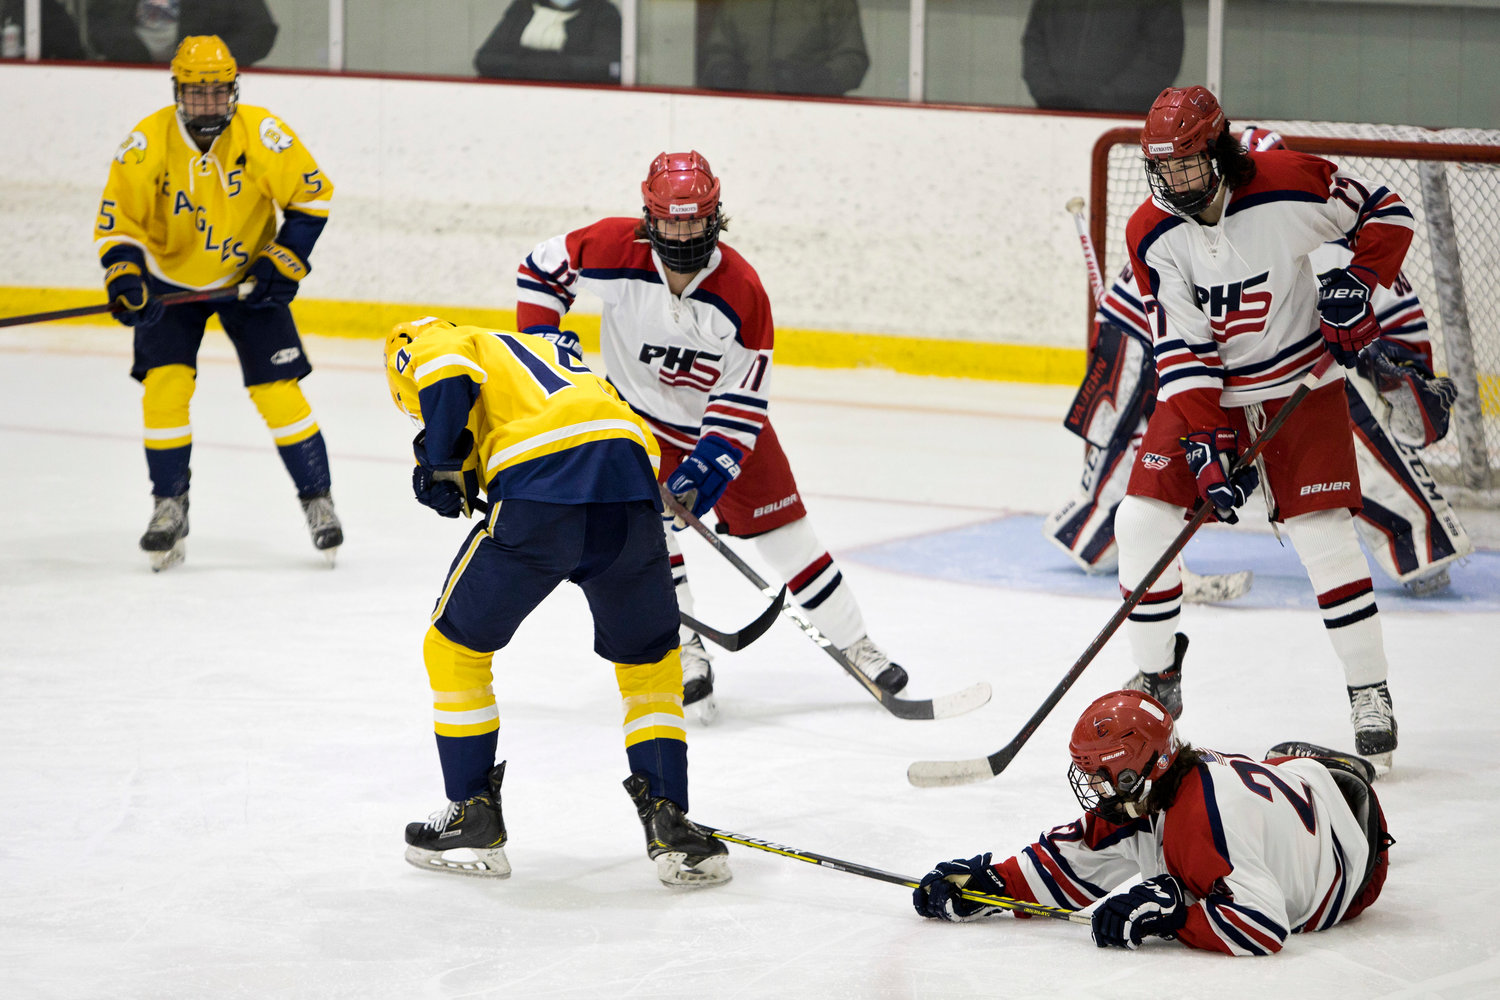 Joe Rocco (on the ice) reaches his stick out to stop a Barrington sho on goal.